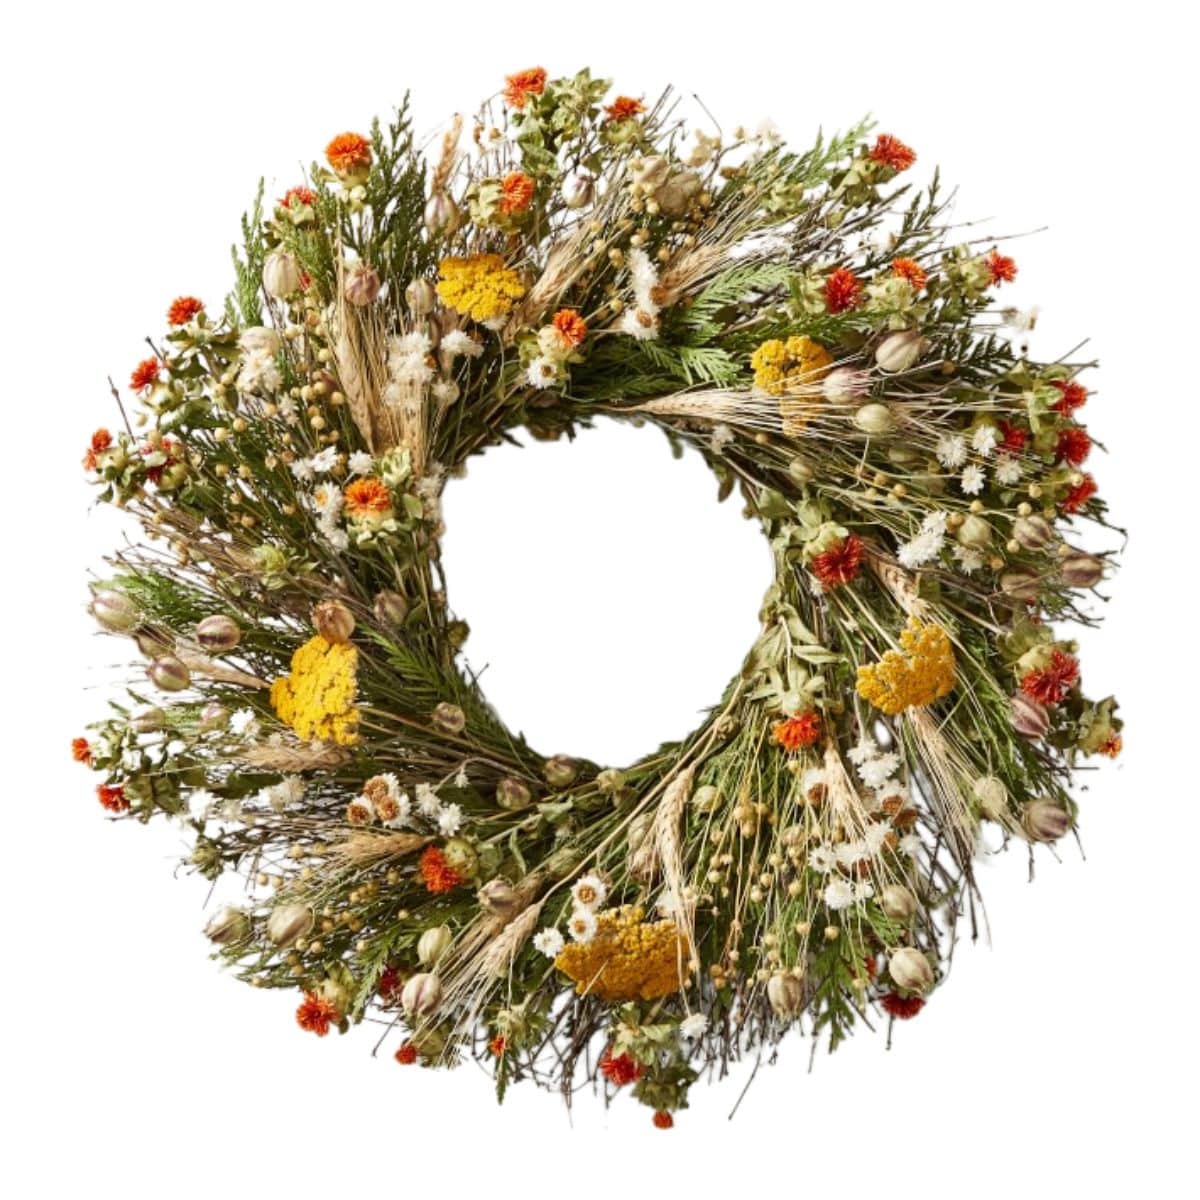 wreath made of orange safflowers, yellow yarrow and ivory ammobium from williams sonoma